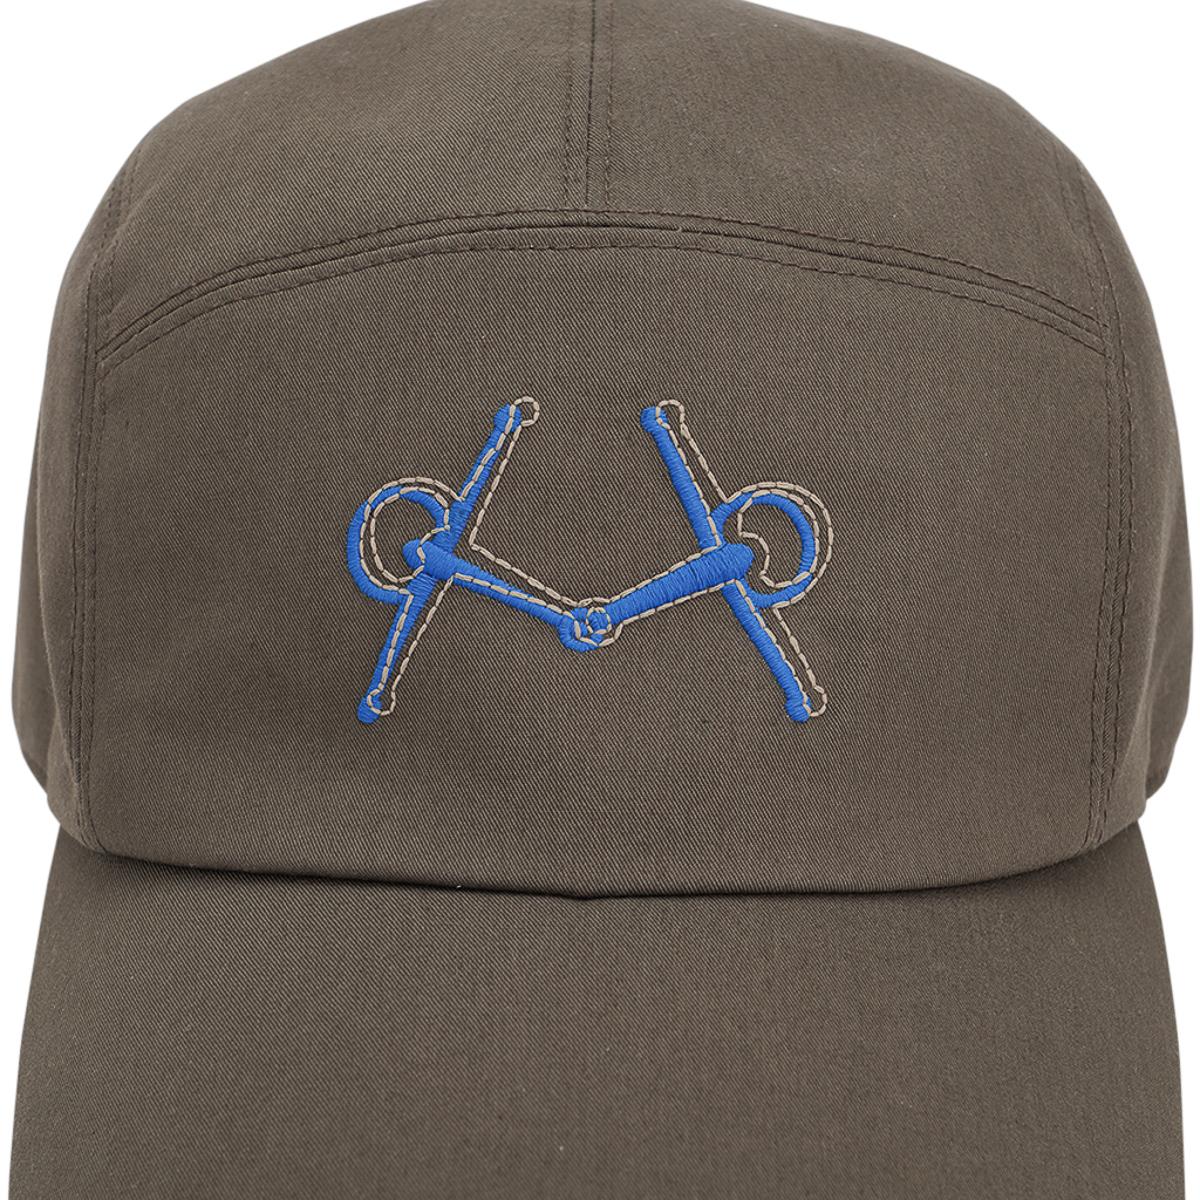 Mightychic offers an Hermes Nevada Mors cap feature in Etoupe.
Blue embroidery with White top stitch at the front of the crown.
Cap is stretch cotton twill, 97% cotton and 3% elastane.
Adjustable at rear with two (2) brushed palladium plated Clou de